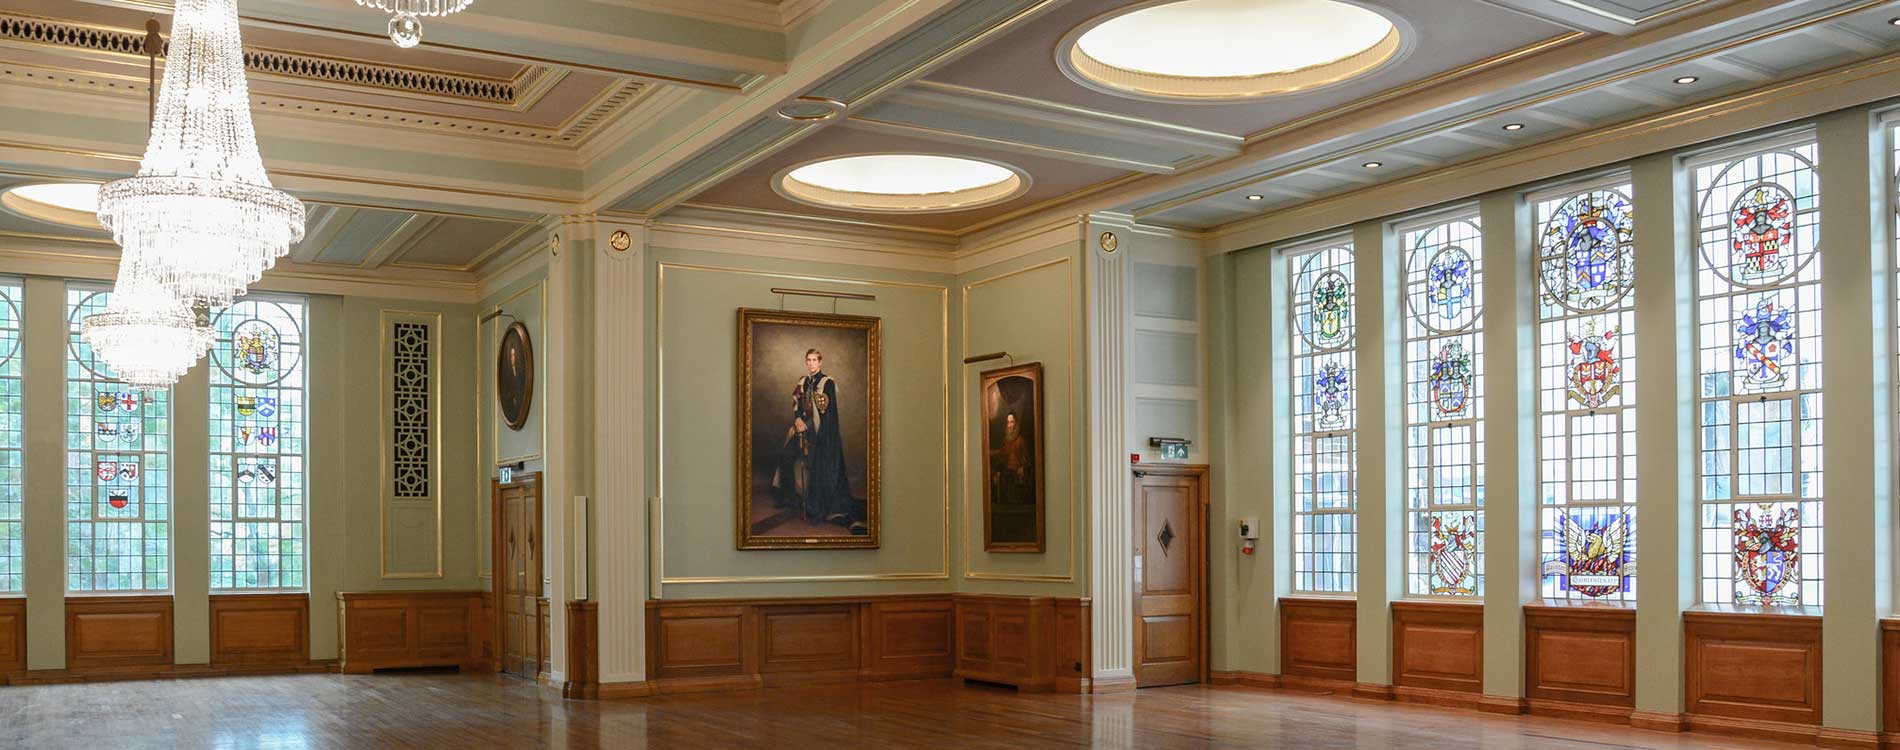 Worshipful-painter-stainers-hall-grand-hall-with-floor-painting-and-guilding